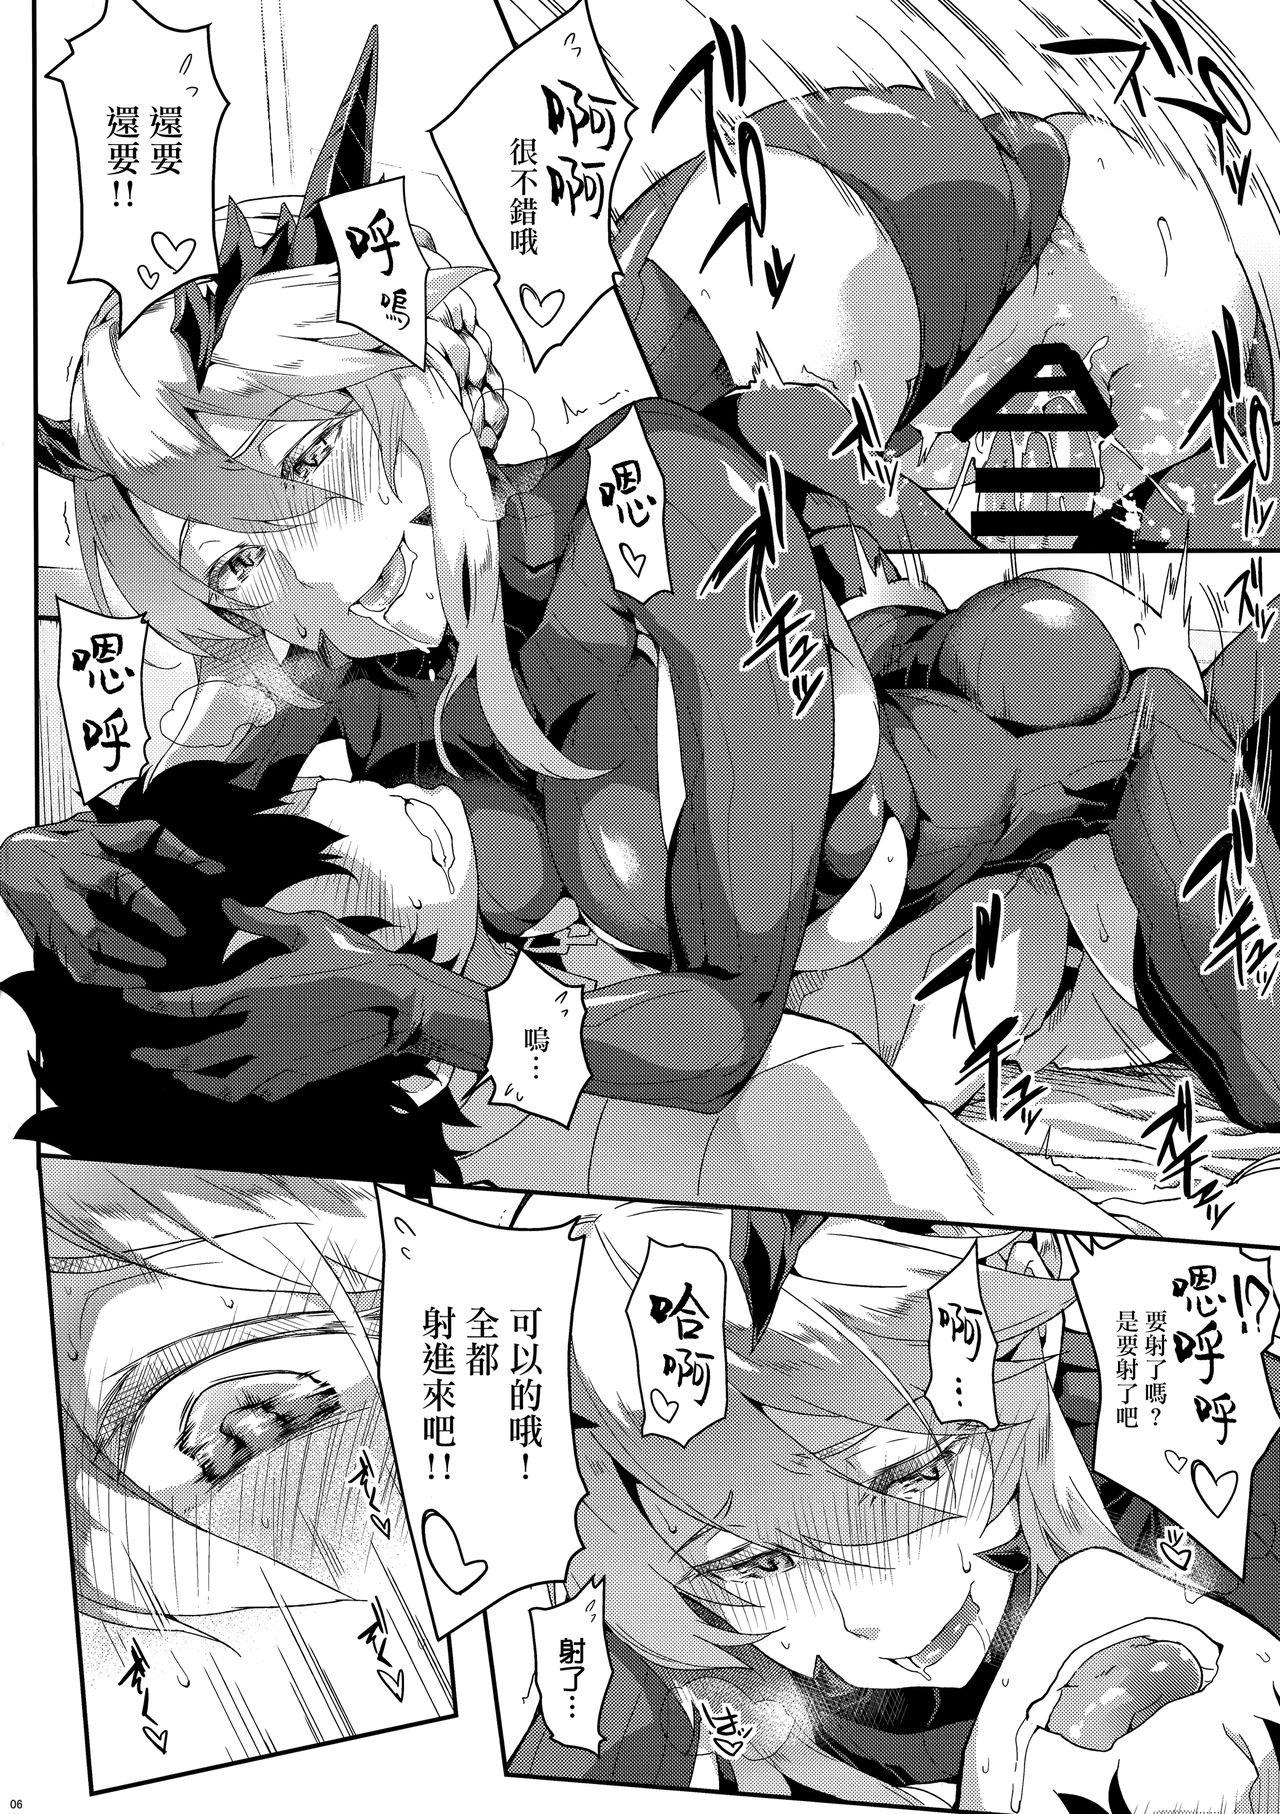 Couple Porn The end of anguish,altanative - Fate grand order Paja - Page 6